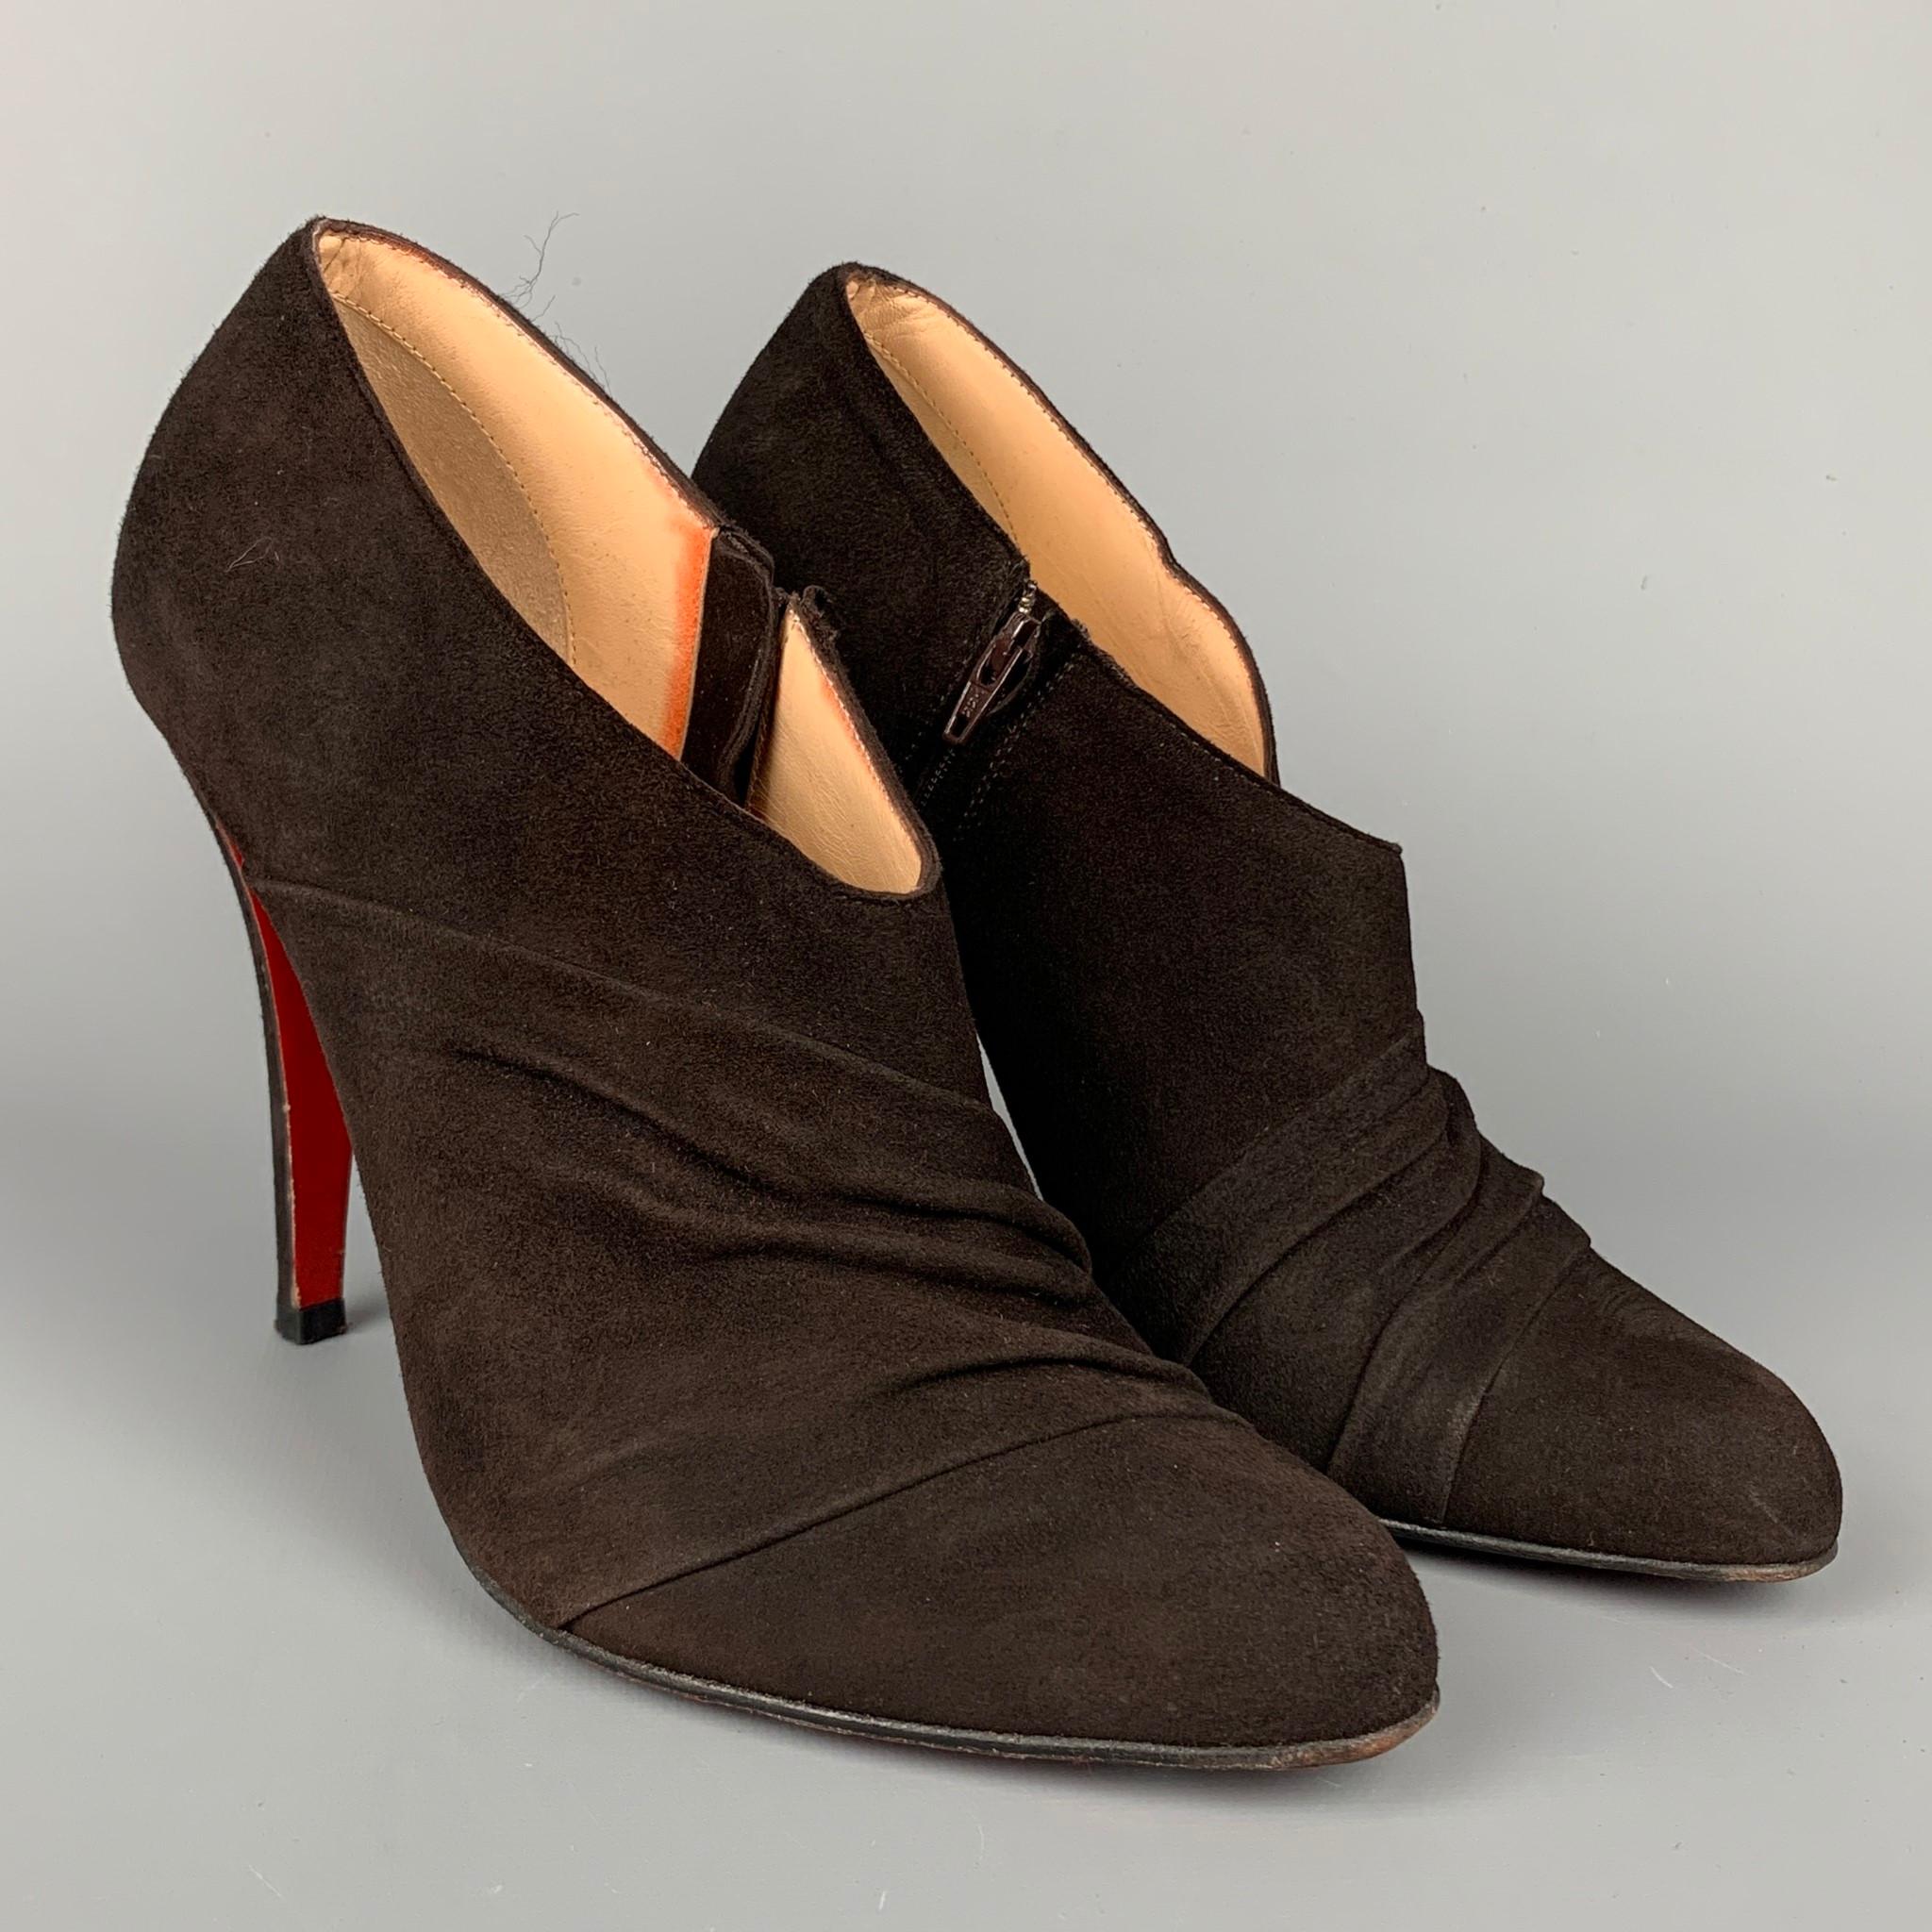 CHRISTIAN LOUBOUTIN boots comes in a dark brown suede featuring ruched design, stacked heel, side zipper closure, and signature red bottom sole. Comes with dust bag. Made in Italy.

Very Good Pre-Owned Condition. Minor wear at sole.
Marked: EU